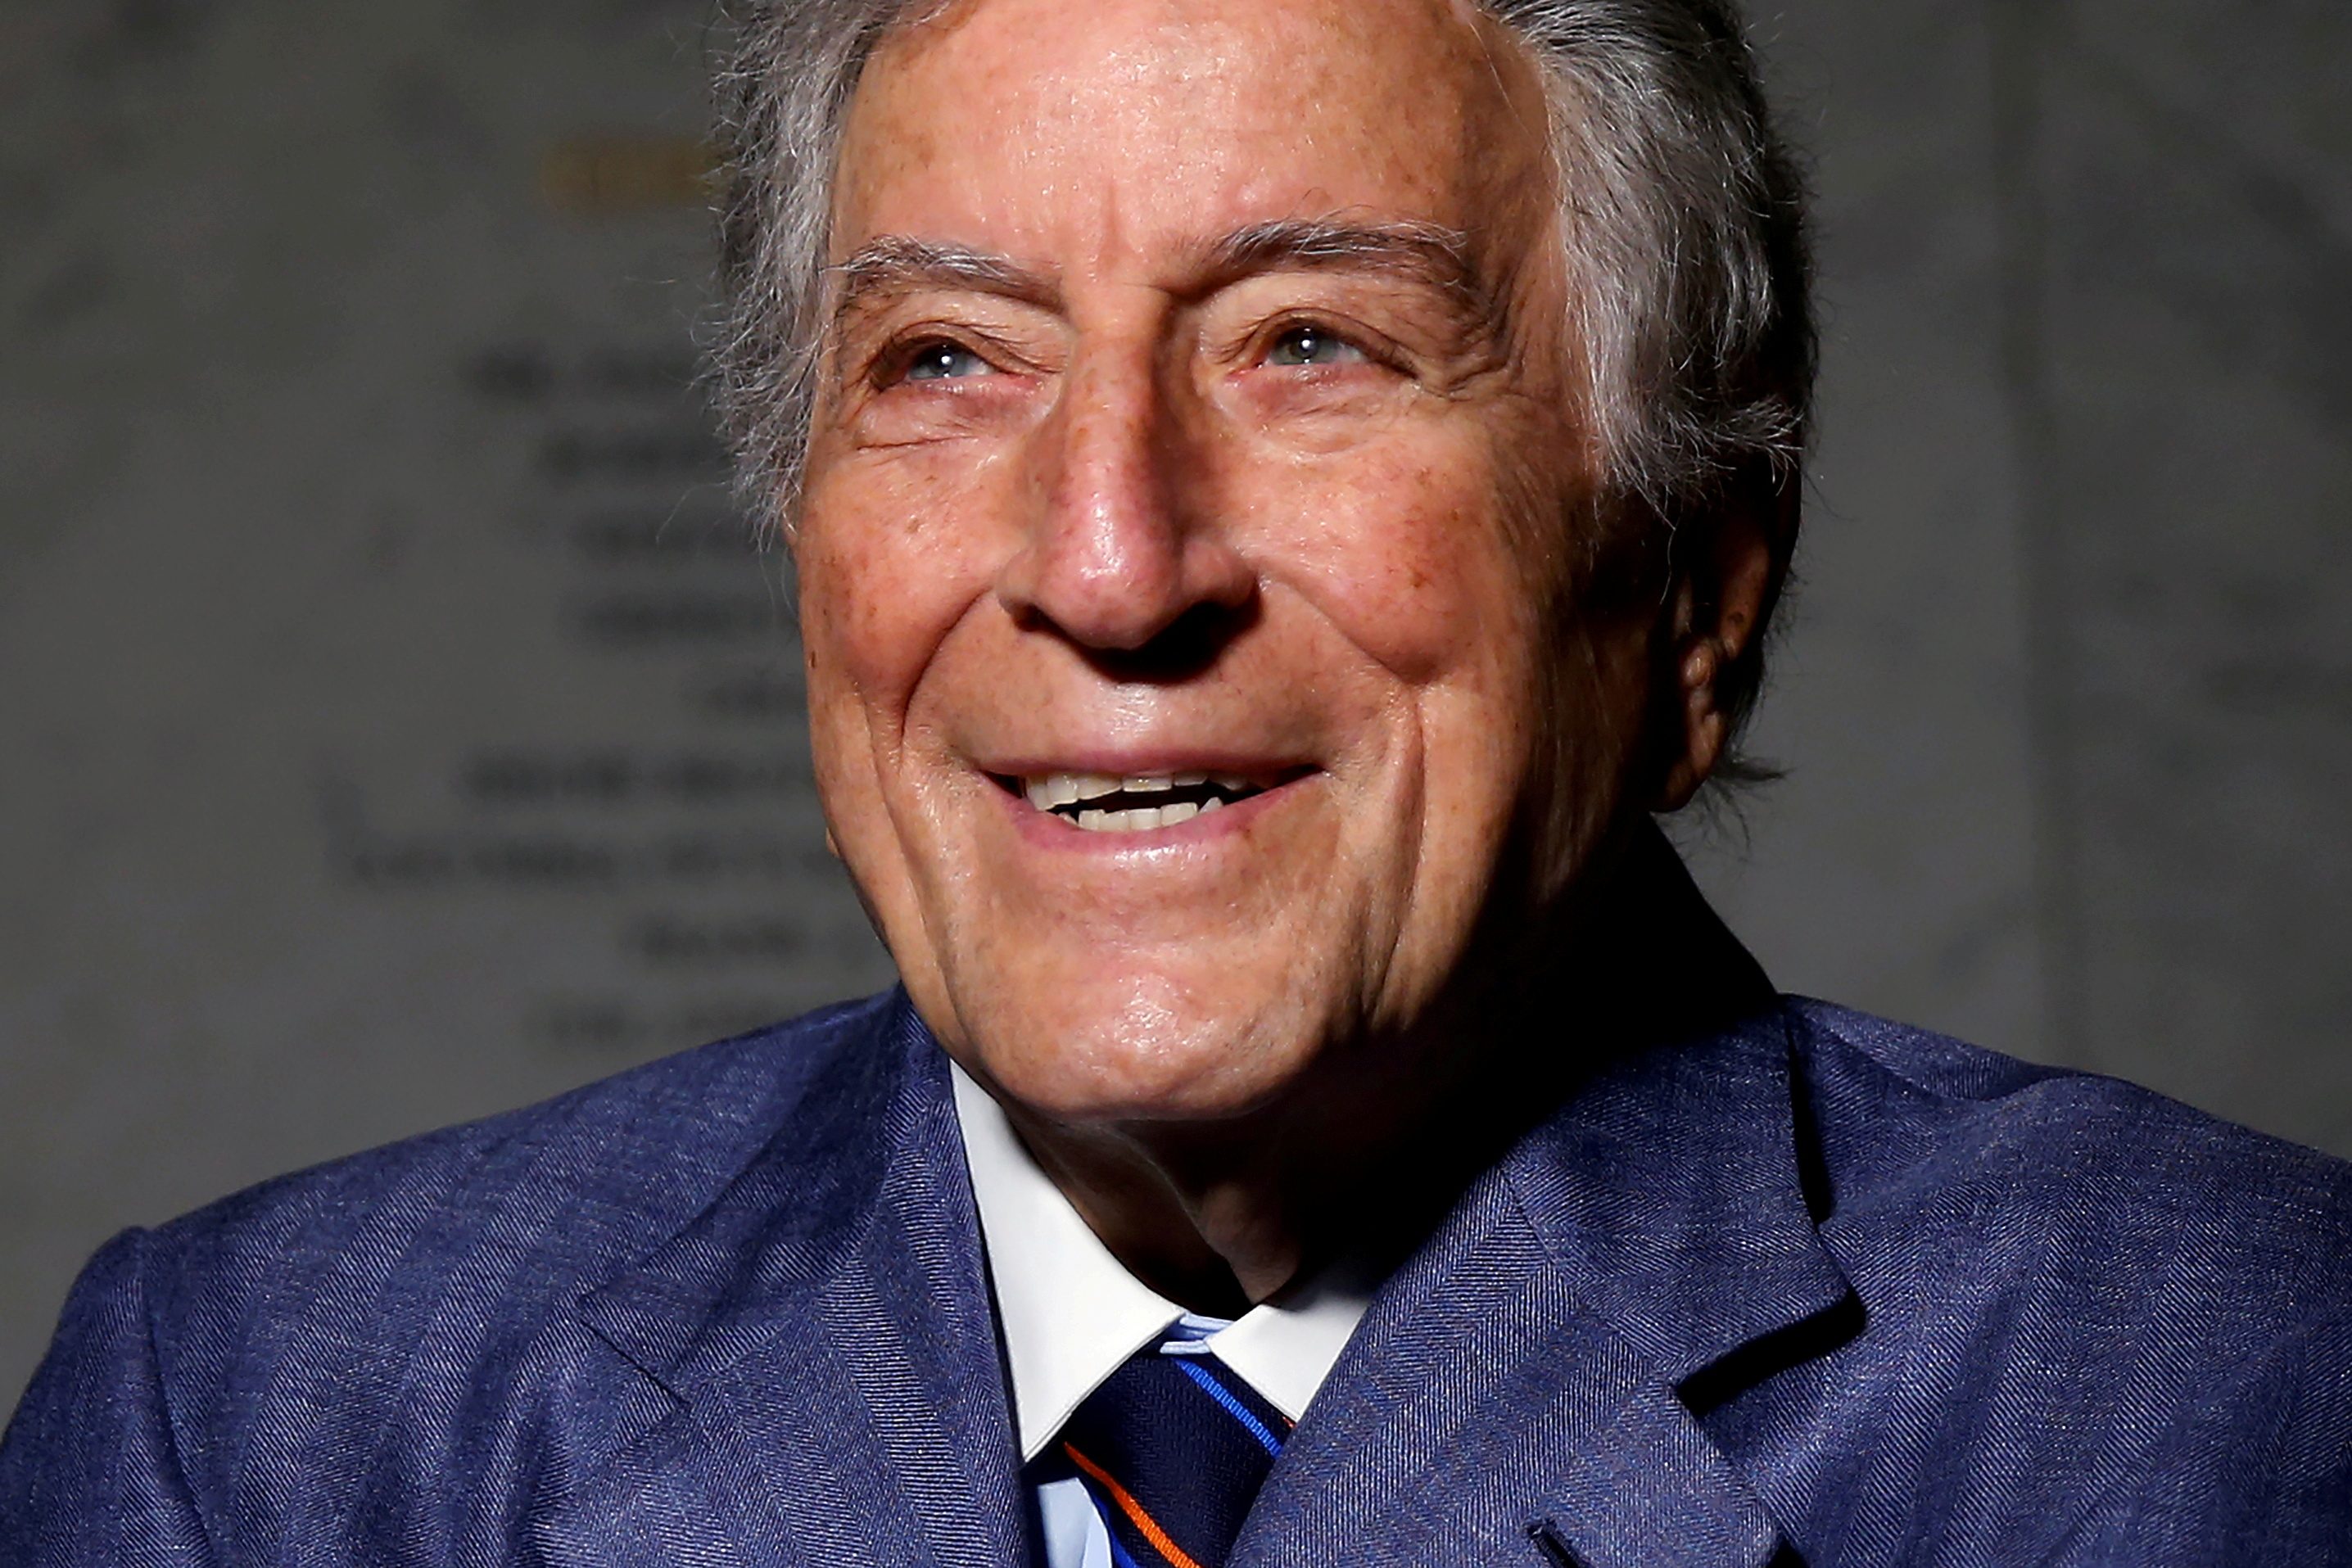 Tony Bennett to retire from concerts on doctor’s orders